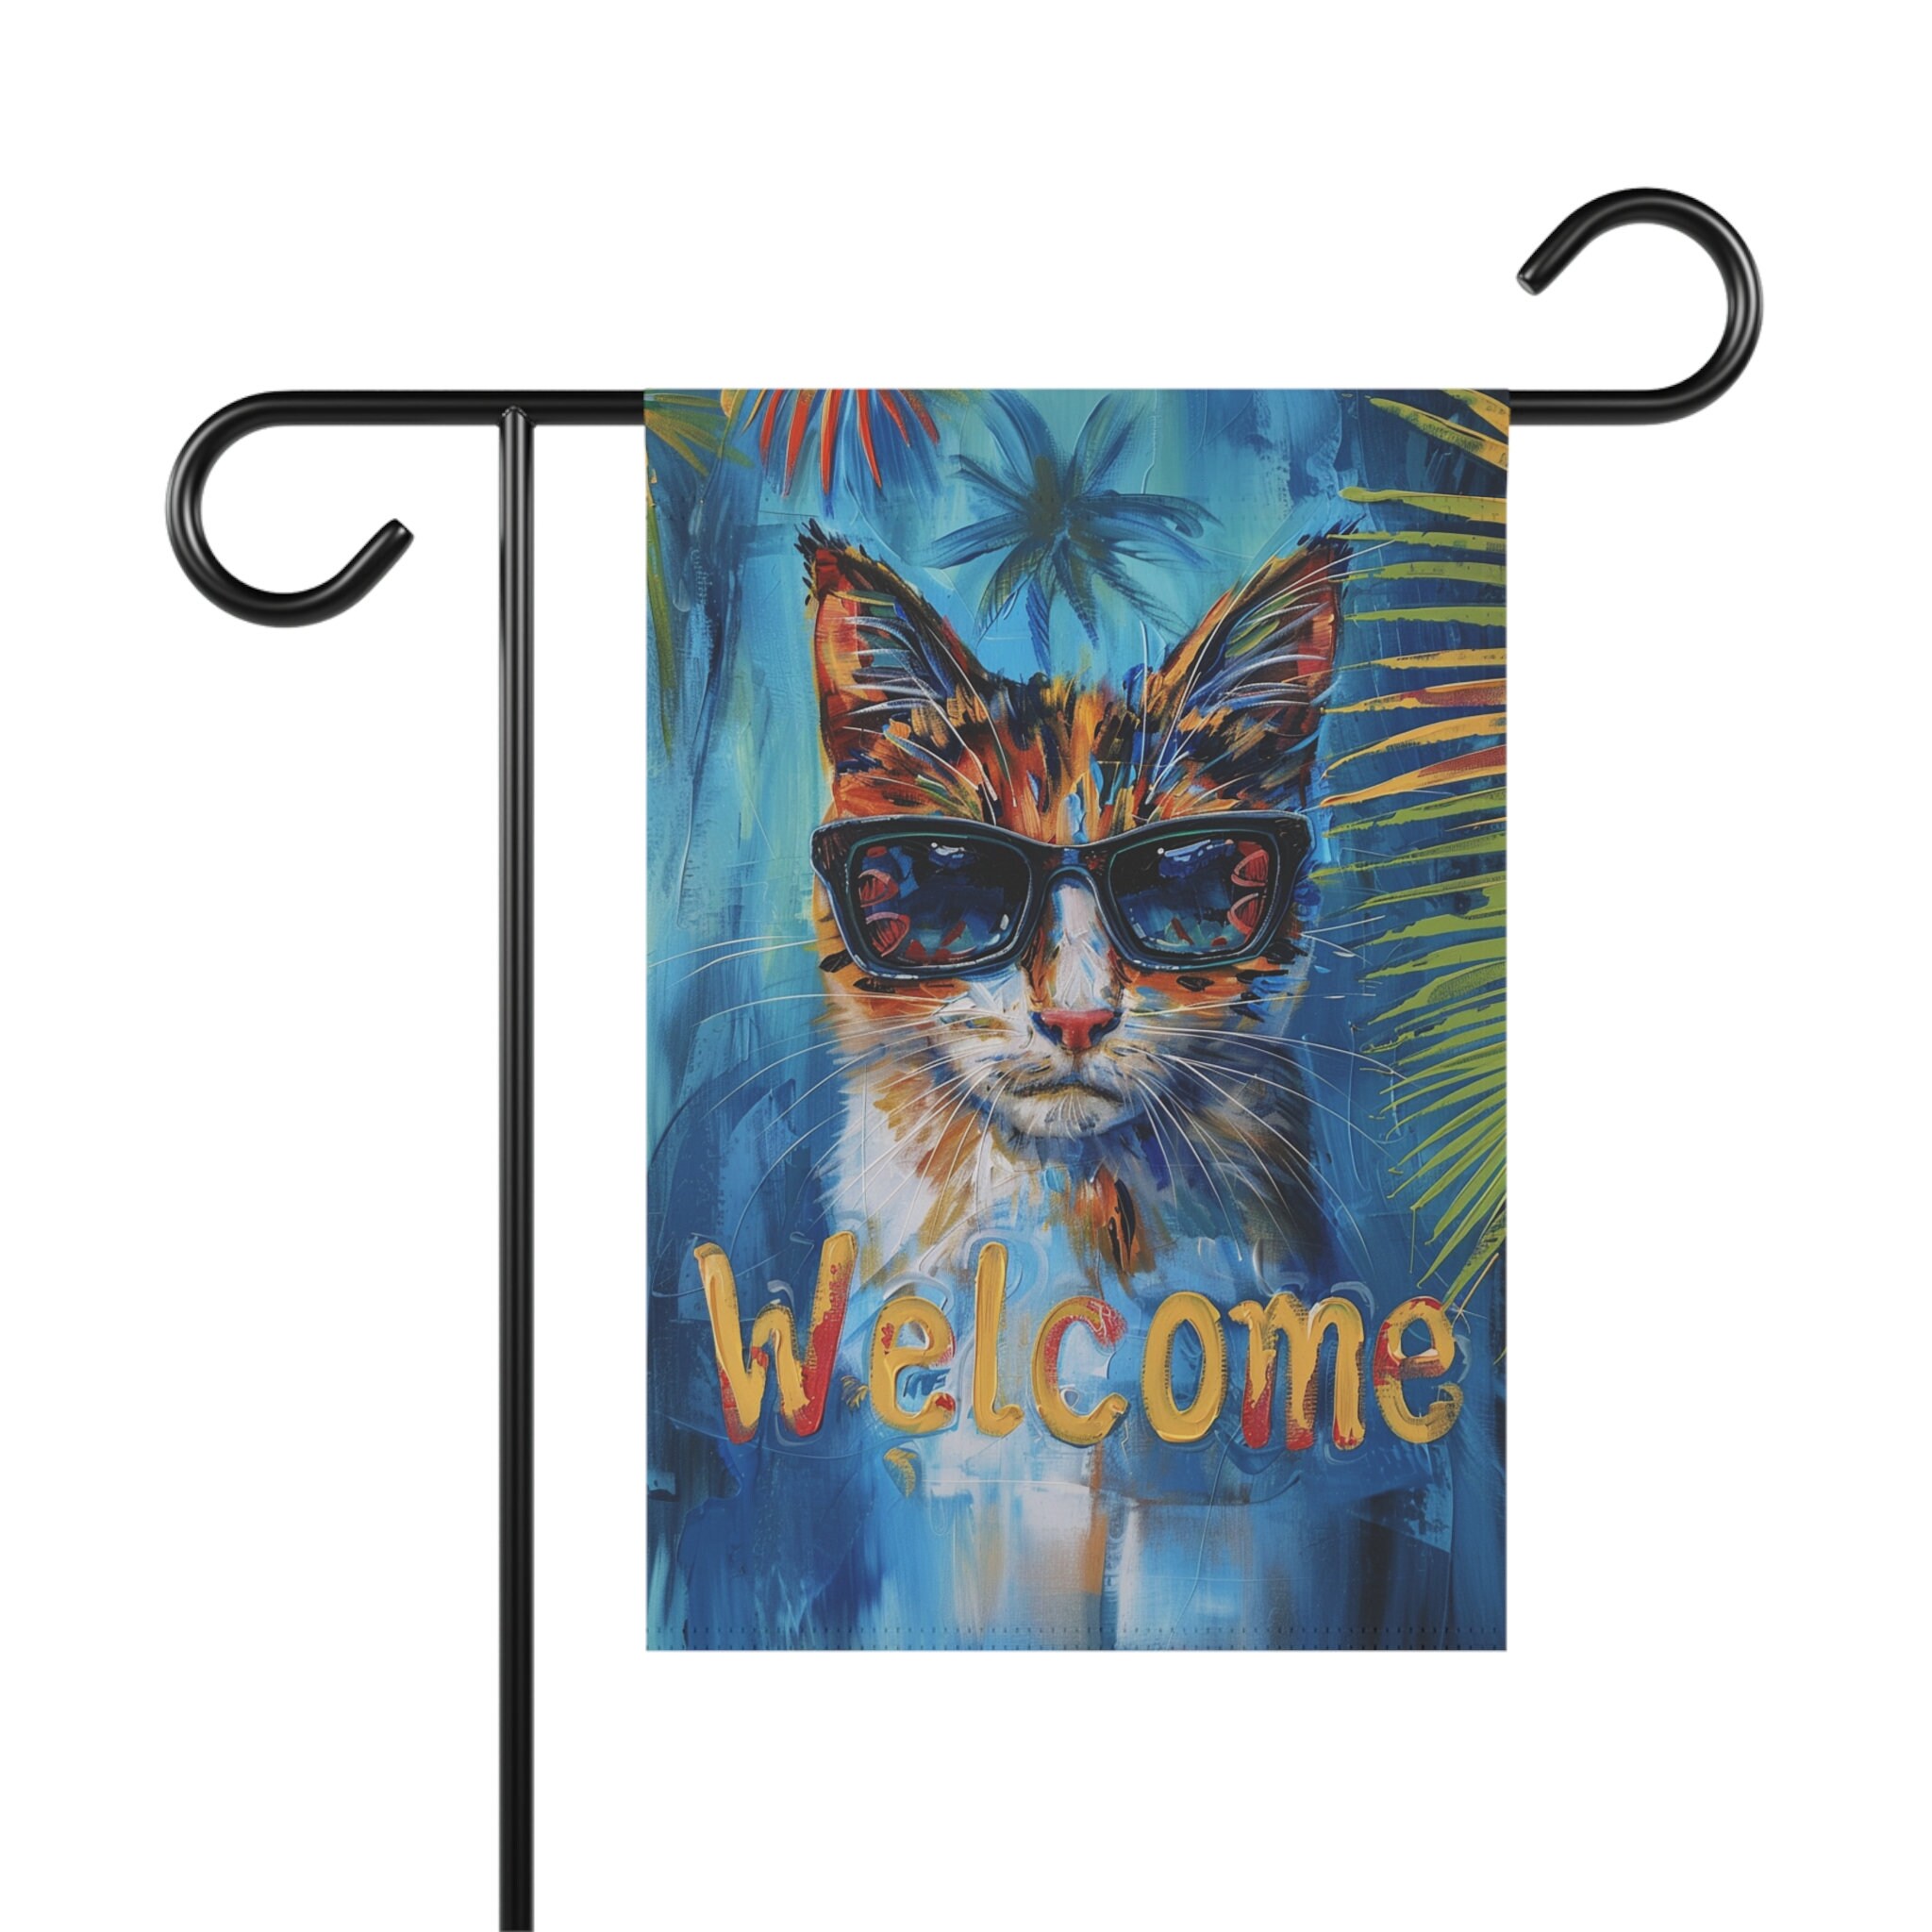 Calico Cat Garden Flag, Summer Themed Decor, Calico Cat Gift, Outdoor Decoration, Cat Lover, Home Decor, Welcome Sign, Yard Art